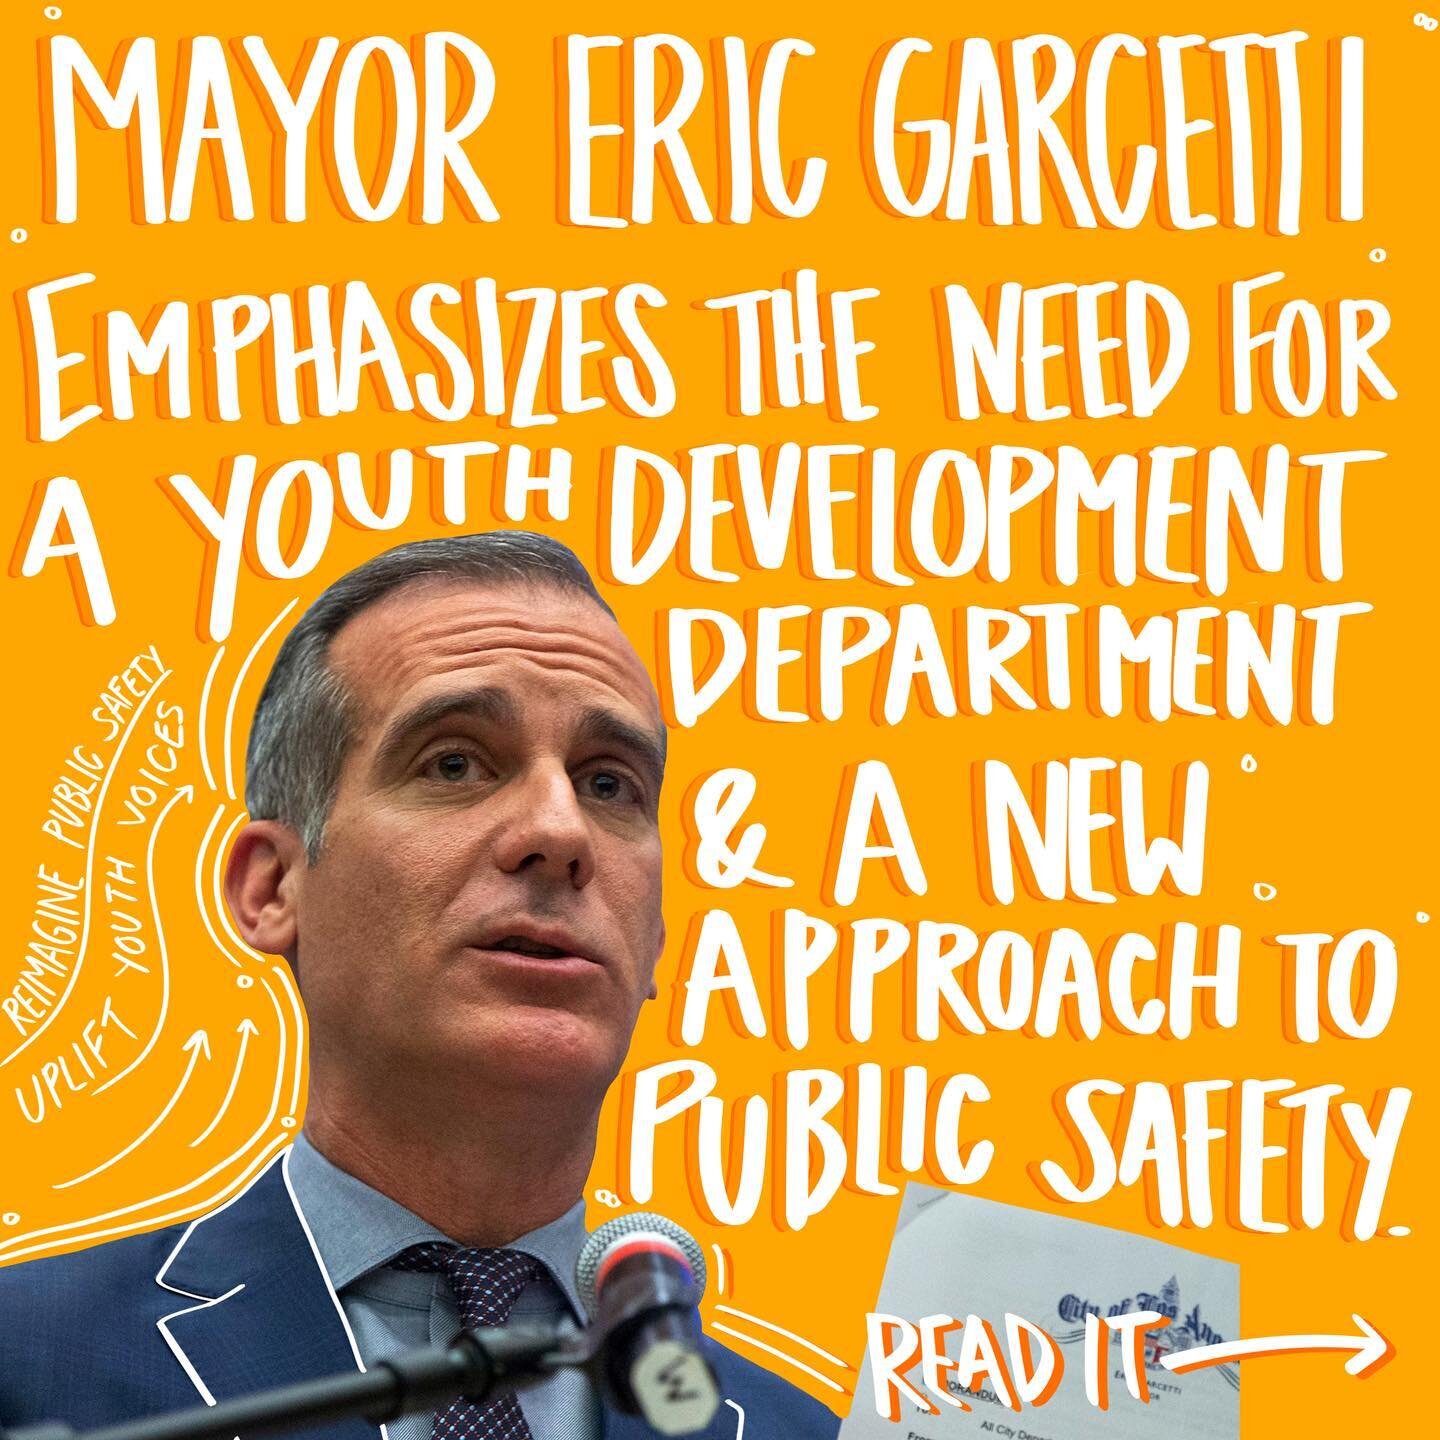 We need a youth dept that focuses on YOUTH EMPLOYMENT and EMPOWERMENT. Mayor Eric Garcetti, here is your chance to create a legacy by creating the 1st Youth Development Department that focuses on doing just that! The city has NO long-term strategy or